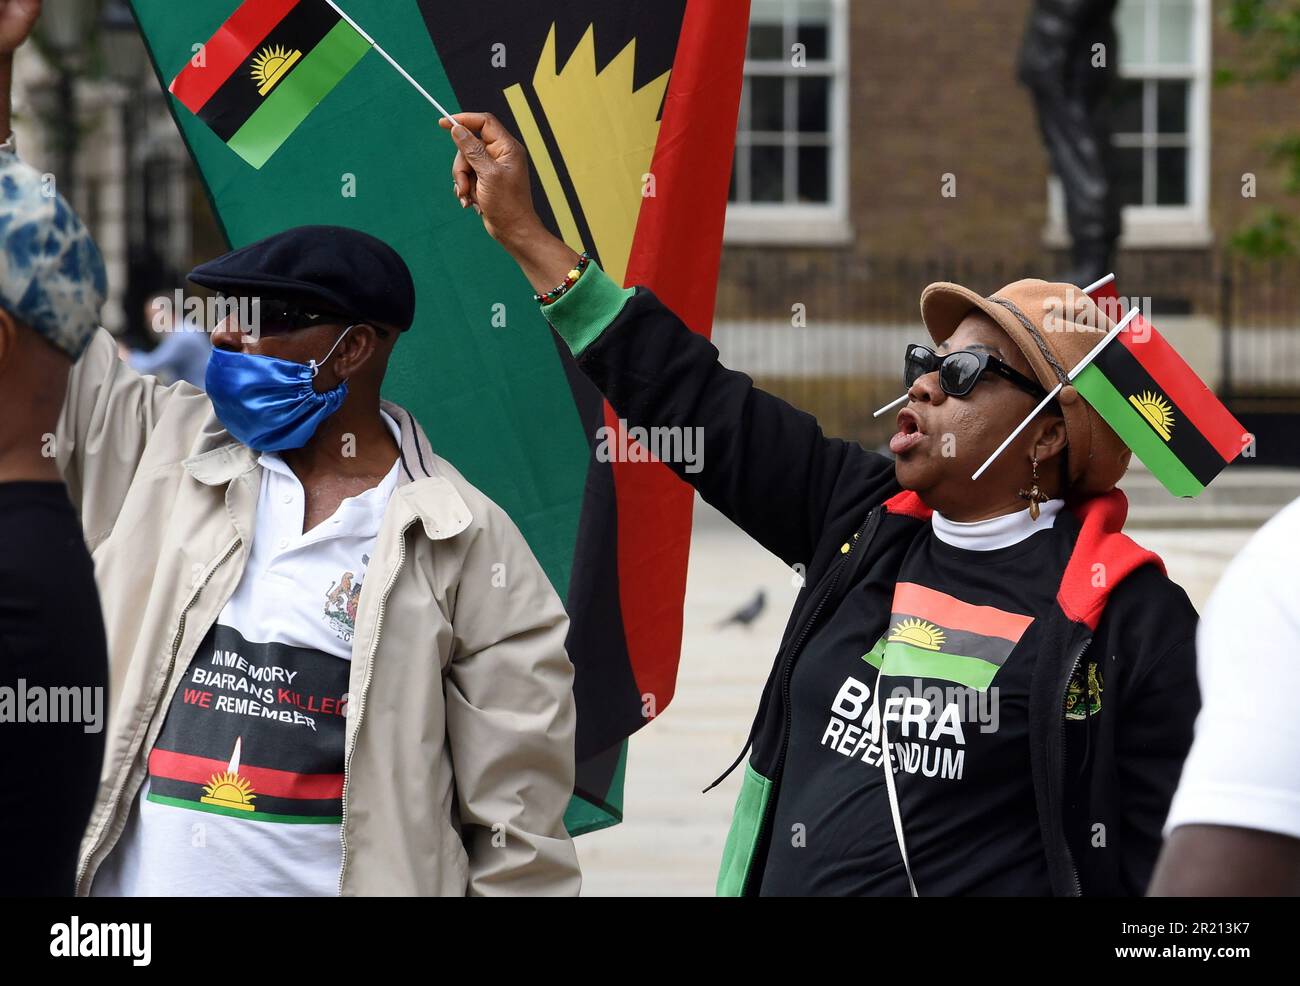 Protest in London for Nnamdi Okwu Kanu a Nigerian pro-Biafra political activist, who is also a British citizen. He is the leader of the Indigenous People of Biafra (IPOB). Kanu founded IPOB in 2014. The main aim of IPOB is to restore the separatist state of Biafra which existed in Nigeria's Eastern Region during the Nigerian Civil War of 1967-1970. Stock Photo